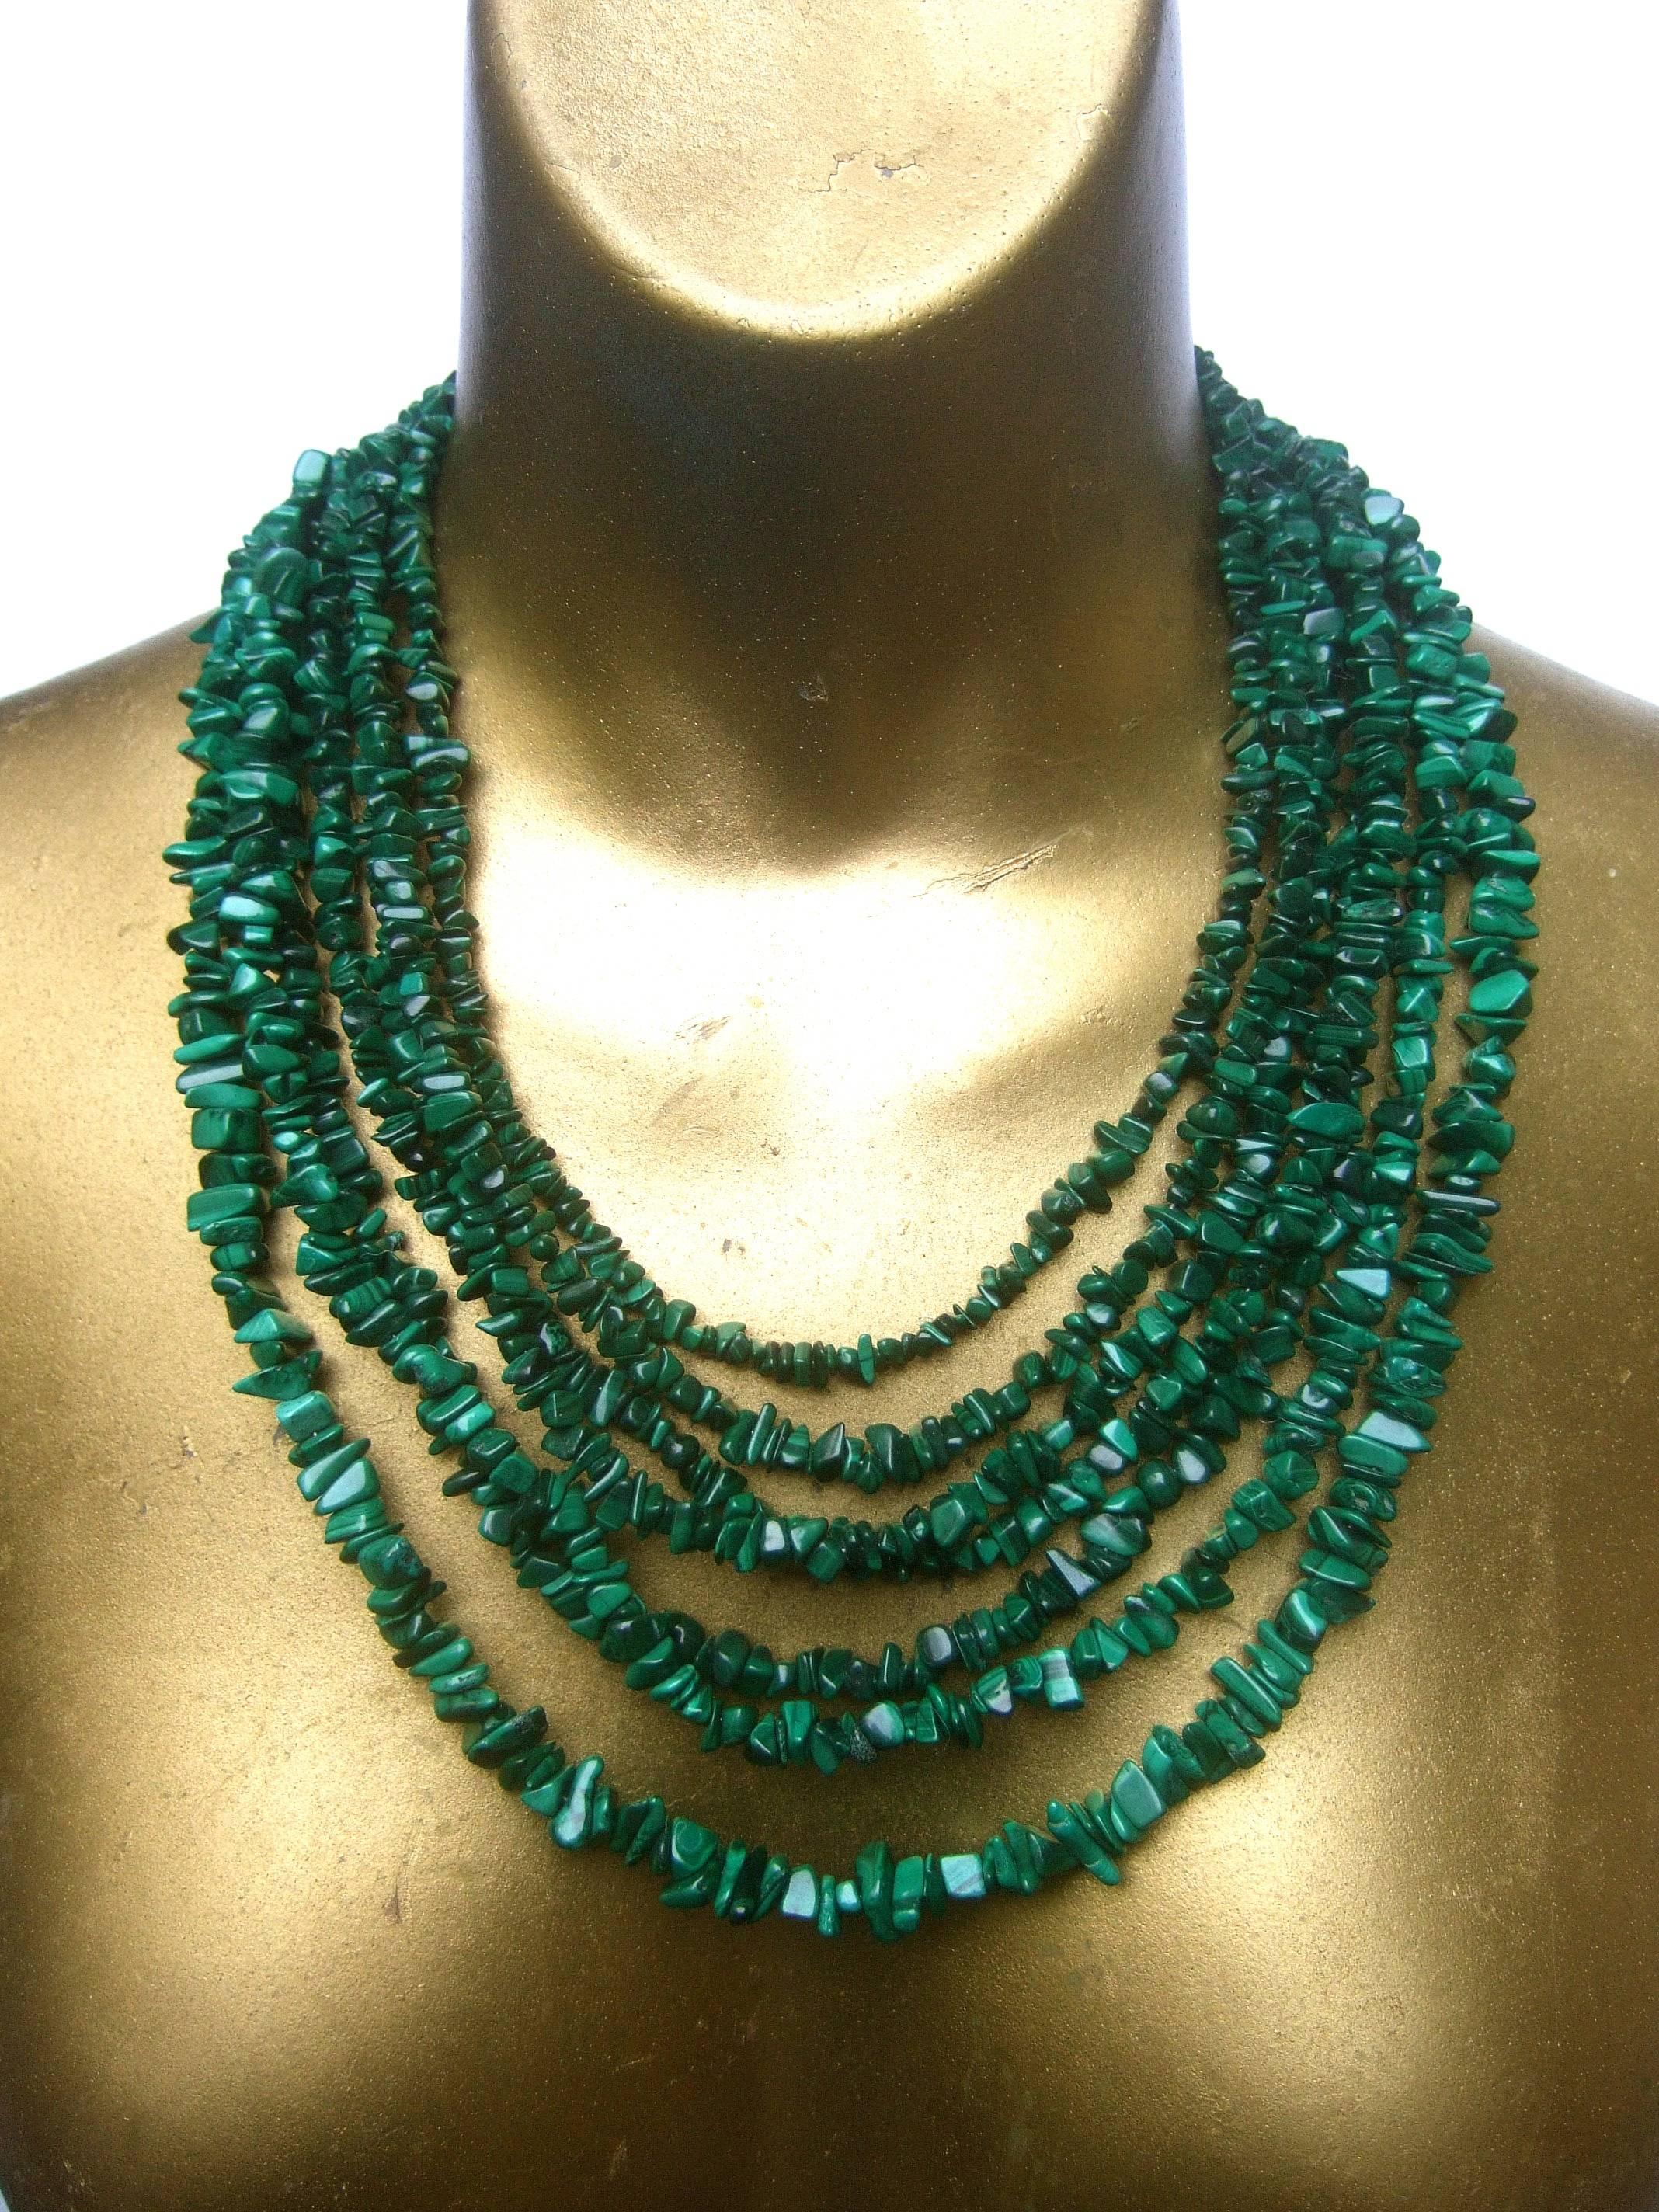 Malachite graduated nugget artisan necklace
The bold statement necklace is designed with
seven graduated strands of enhanced malachite 
nuggets

Makes a dramatic accessory that transitions
effortlessly from casual to formal wear

The strands of